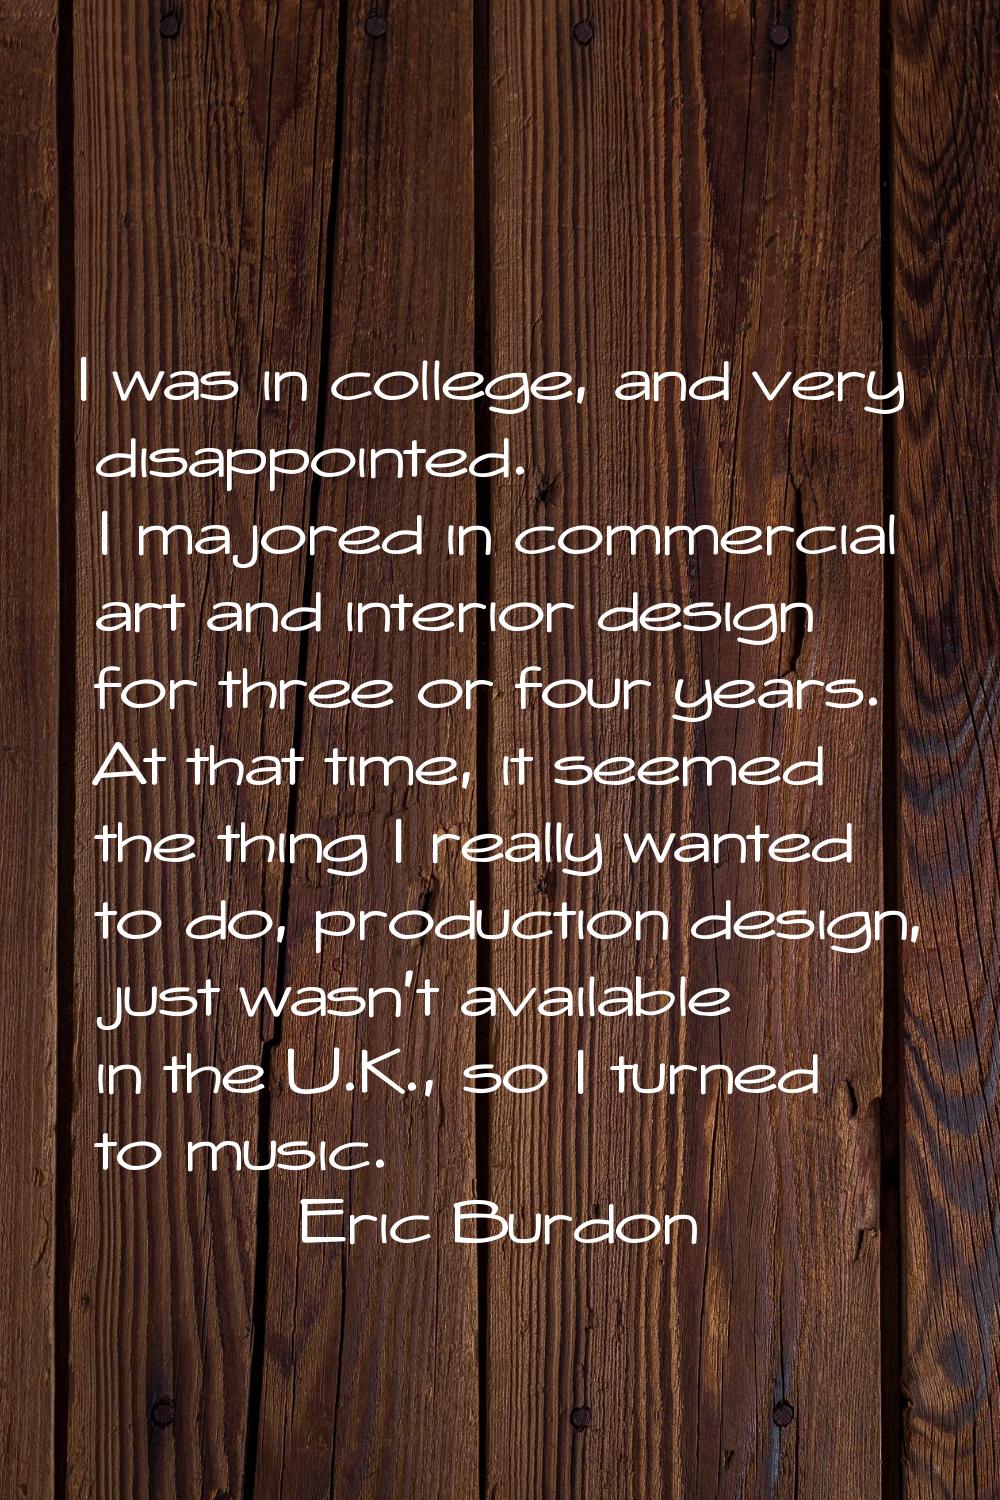 I was in college, and very disappointed. I majored in commercial art and interior design for three 